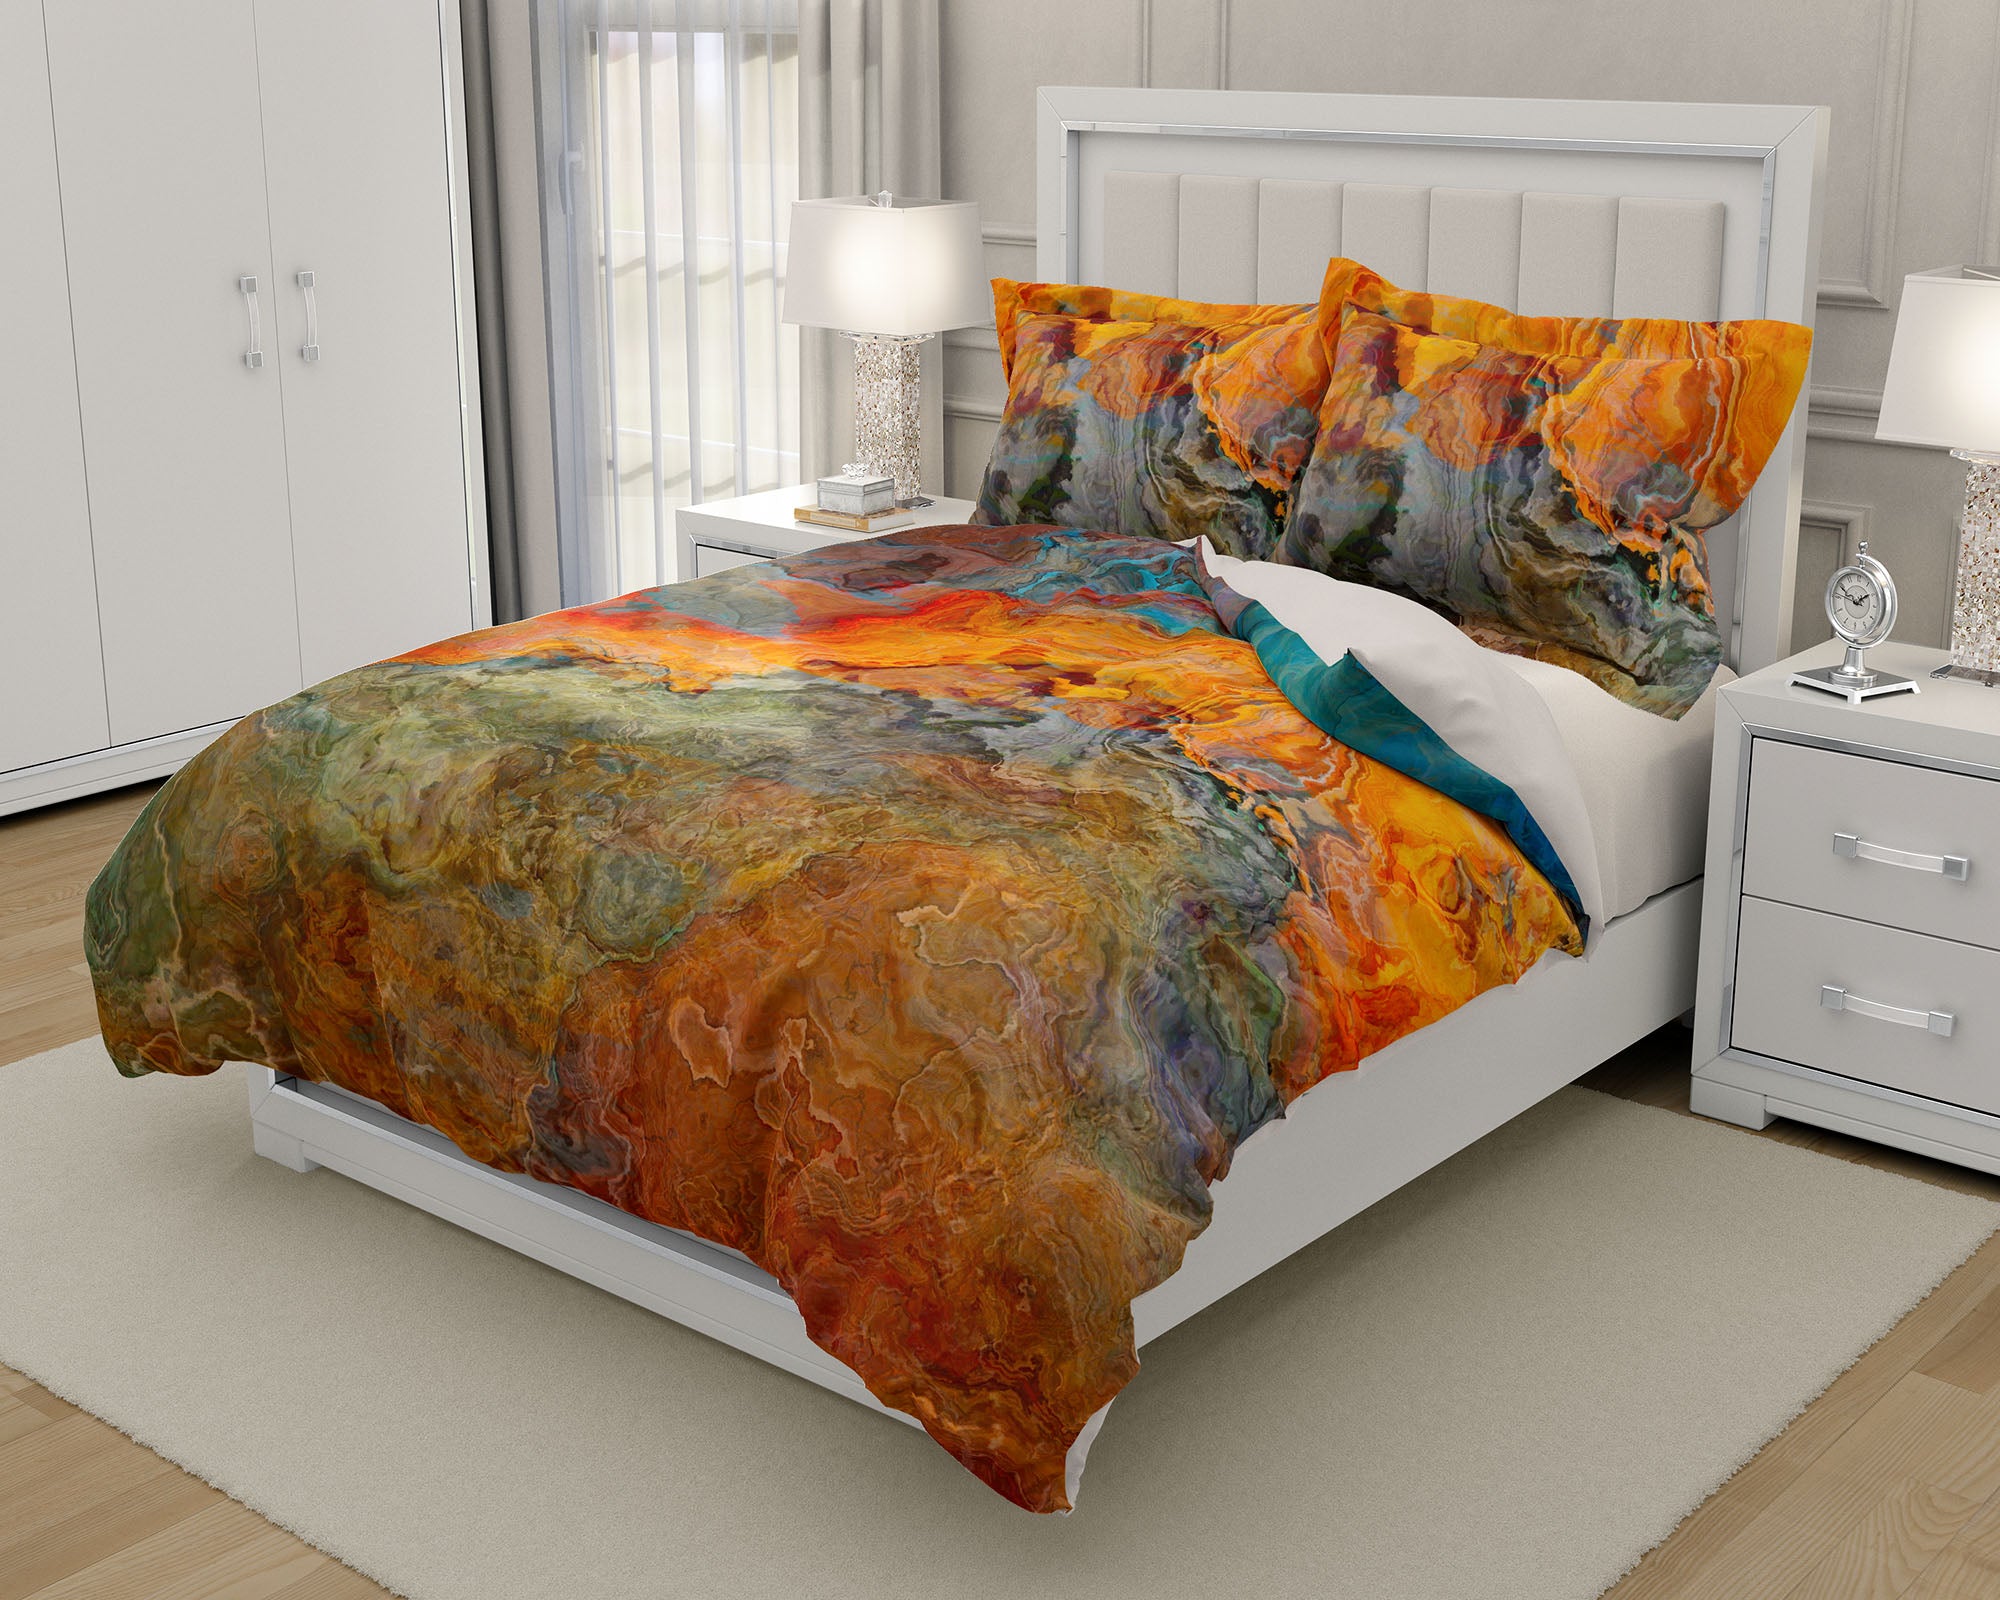 Duvet Cover With Abstract Art King Or Queen In Orange Blue And